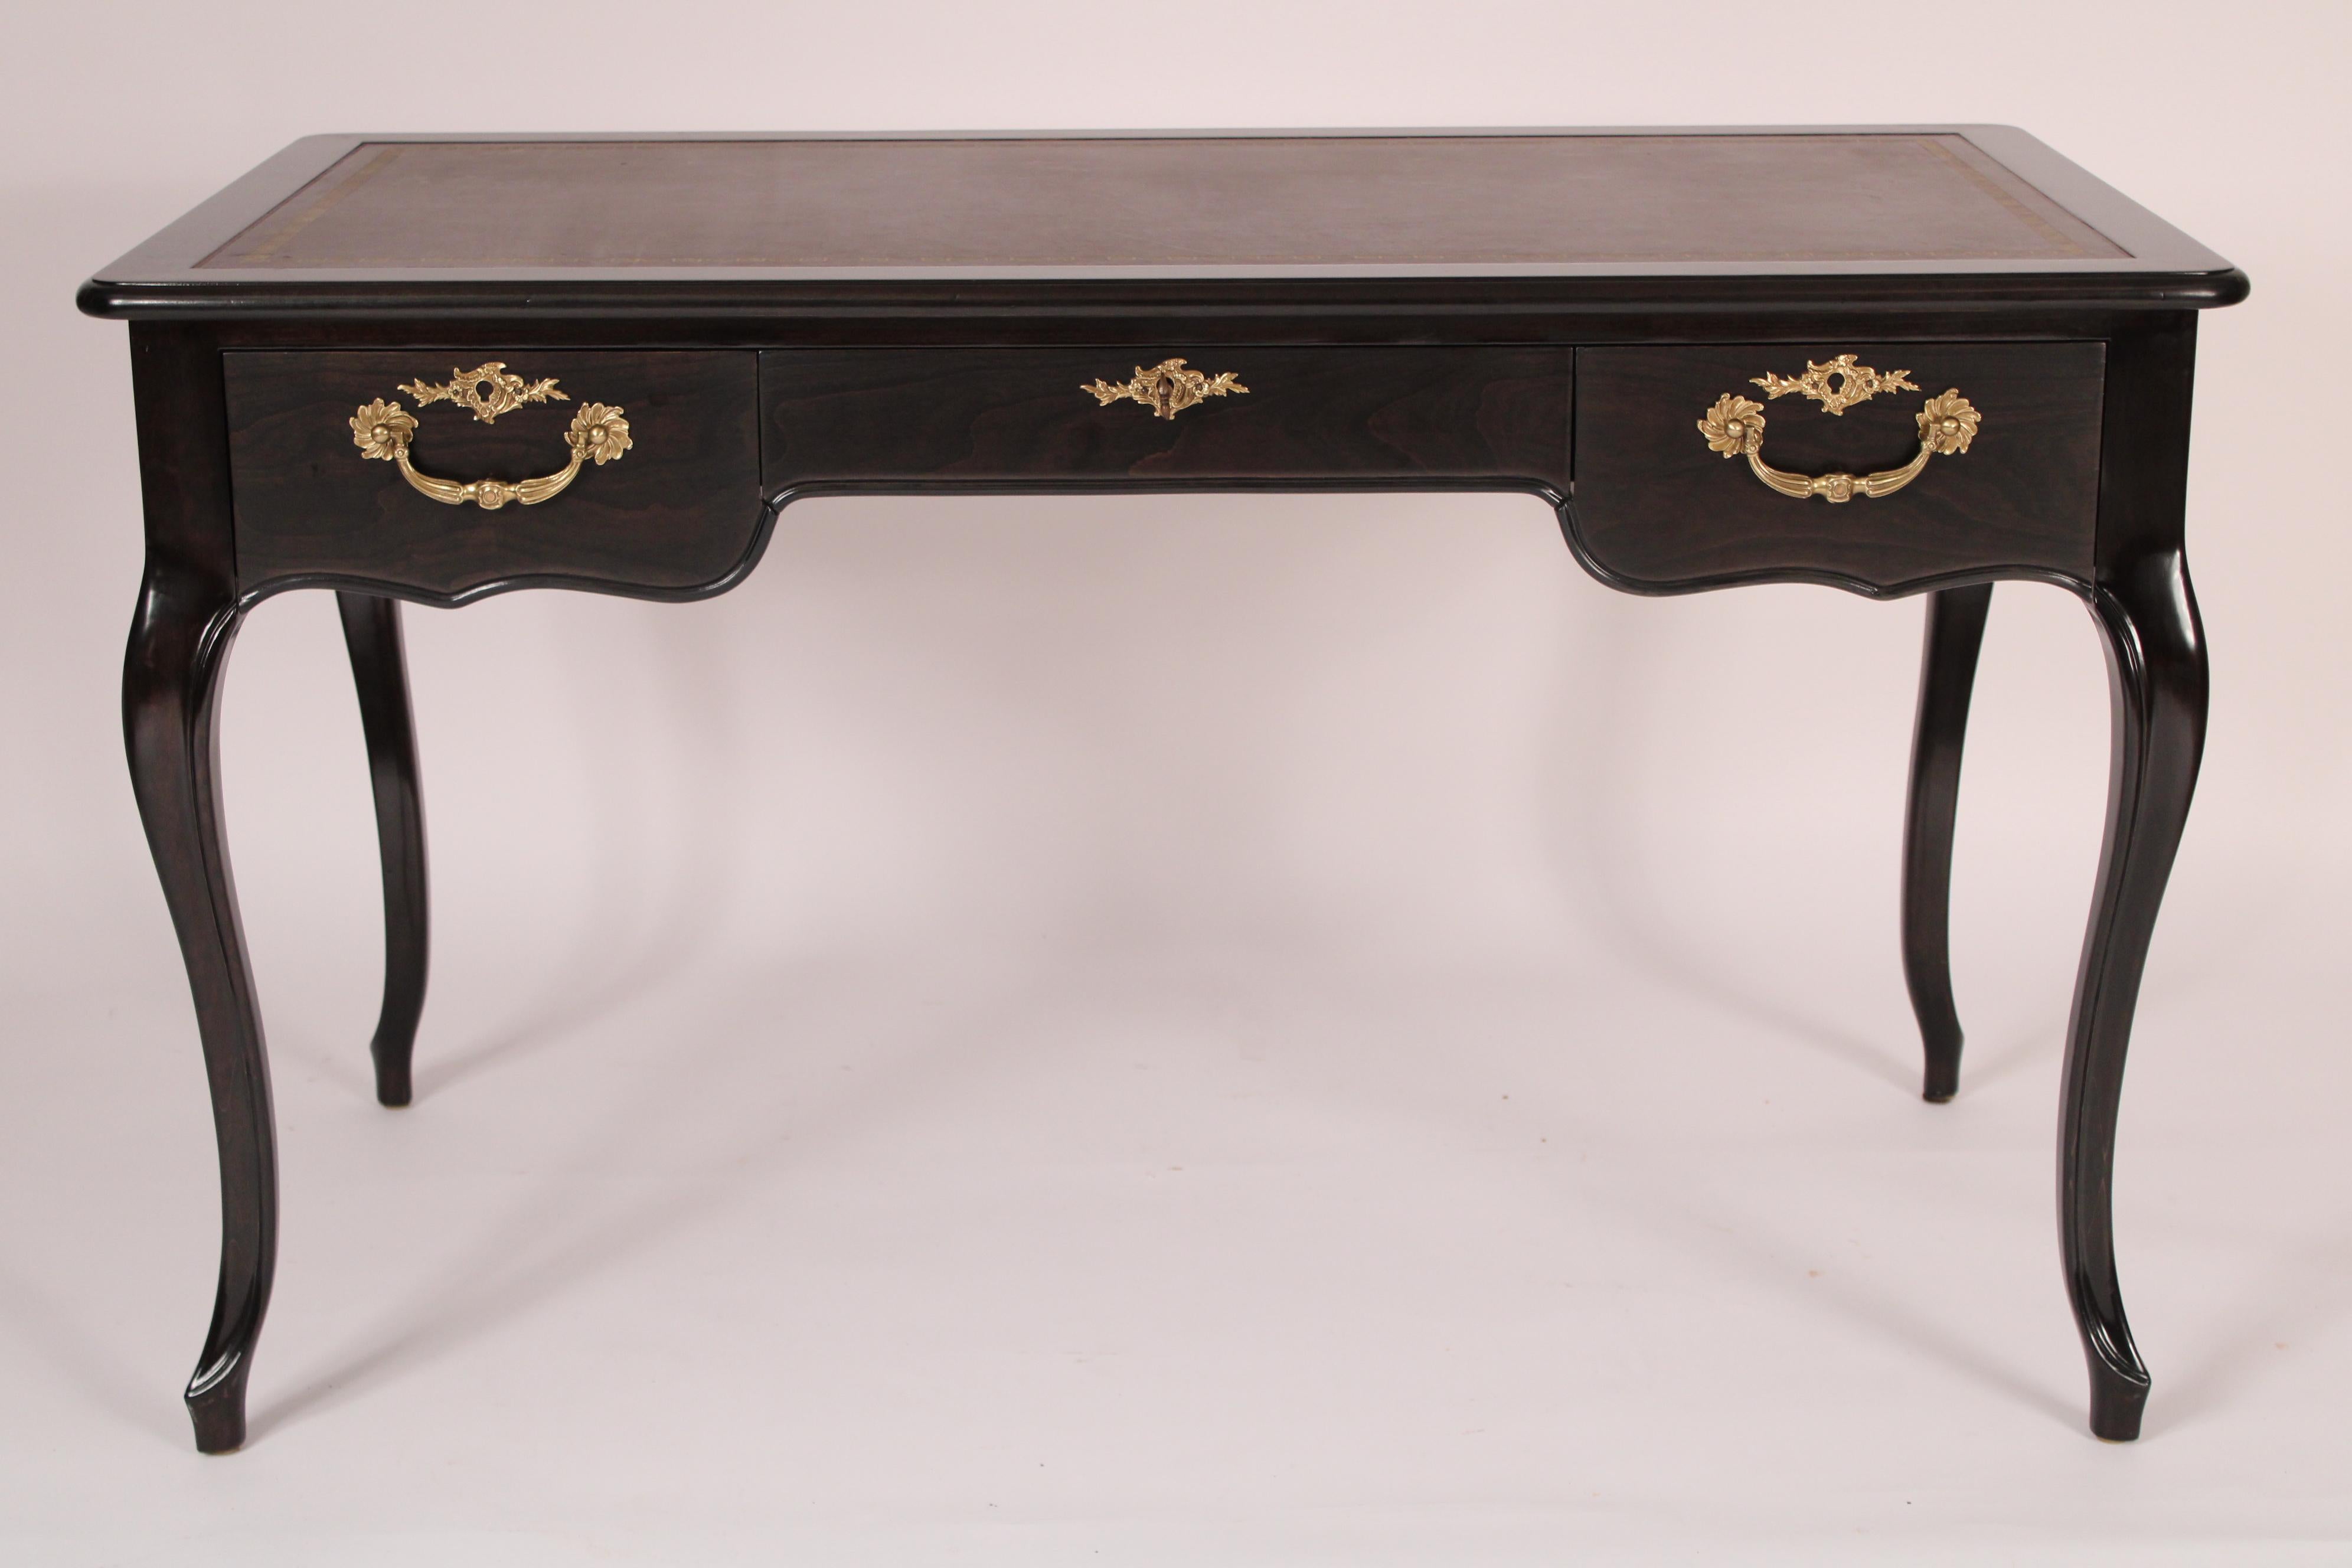 Louis XV style Black lacquer writing table, circa 2000. Made by Baker. With a rectangular overhanging top with rounded corners the top inset with tooled leather, 3 frieze drawers the outside drawers with bronze pulls, resting on cabriole legs.